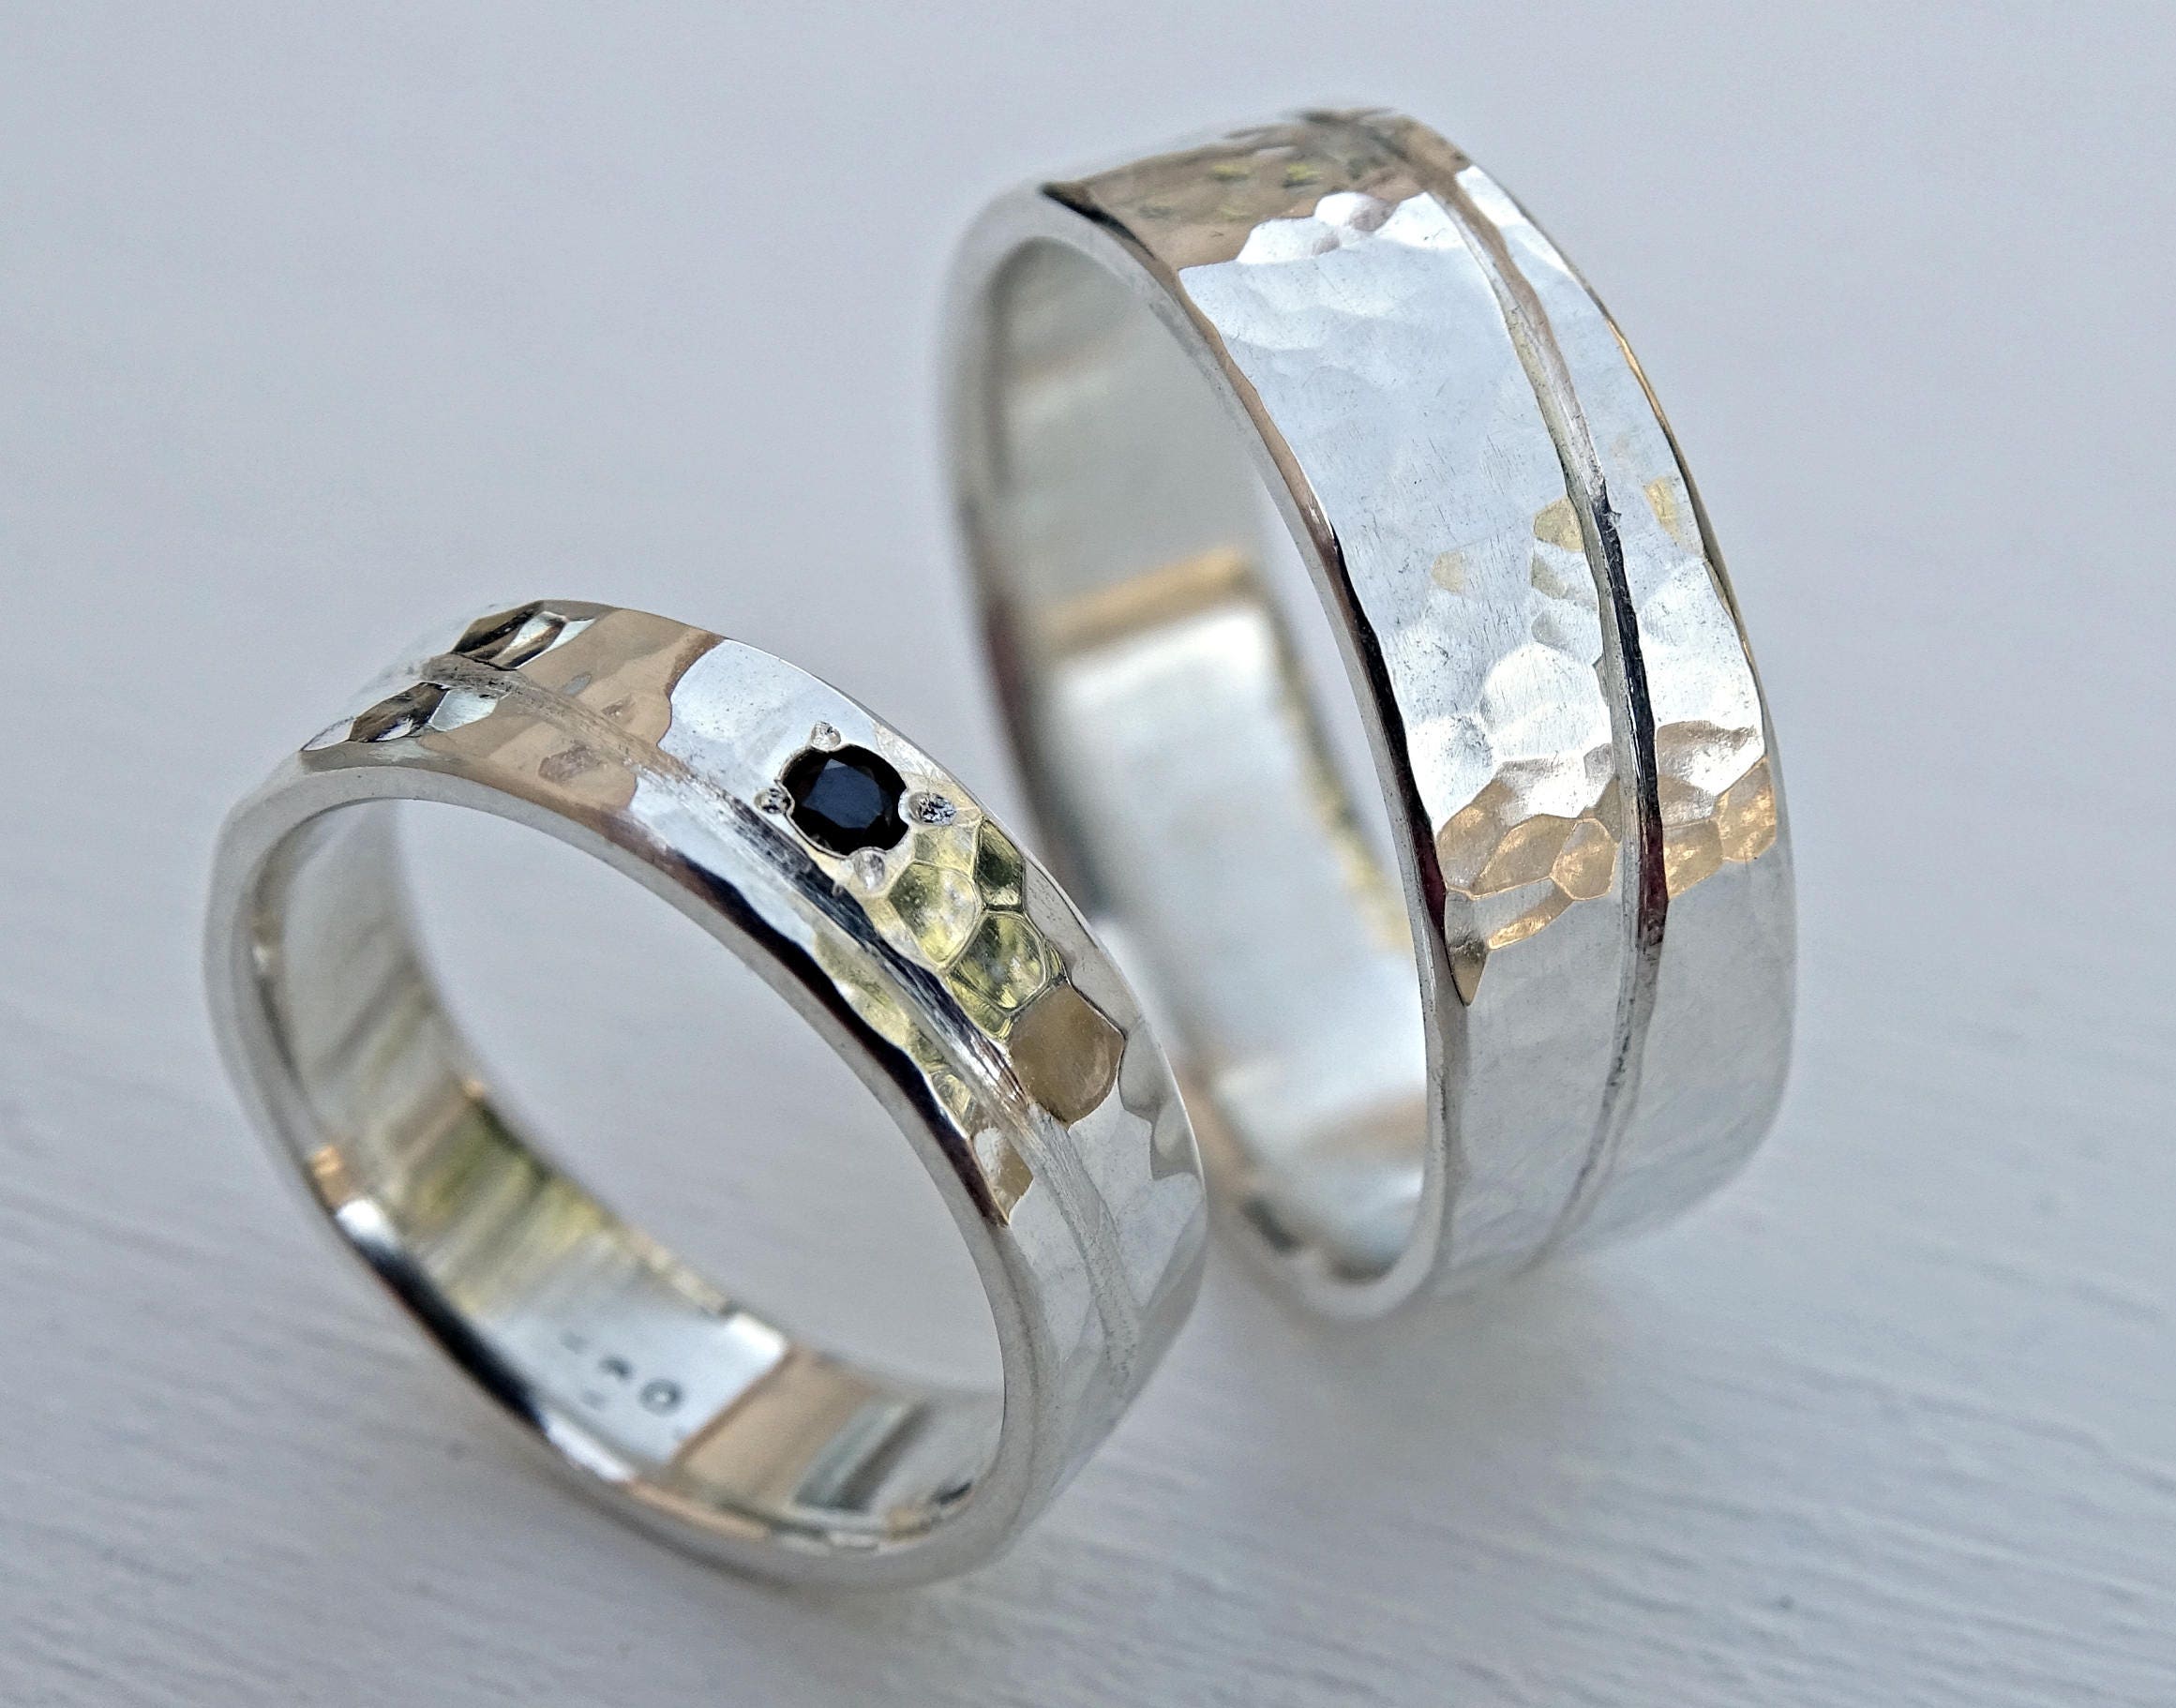  Unique  wedding bands  silver matching promise rings  silver 